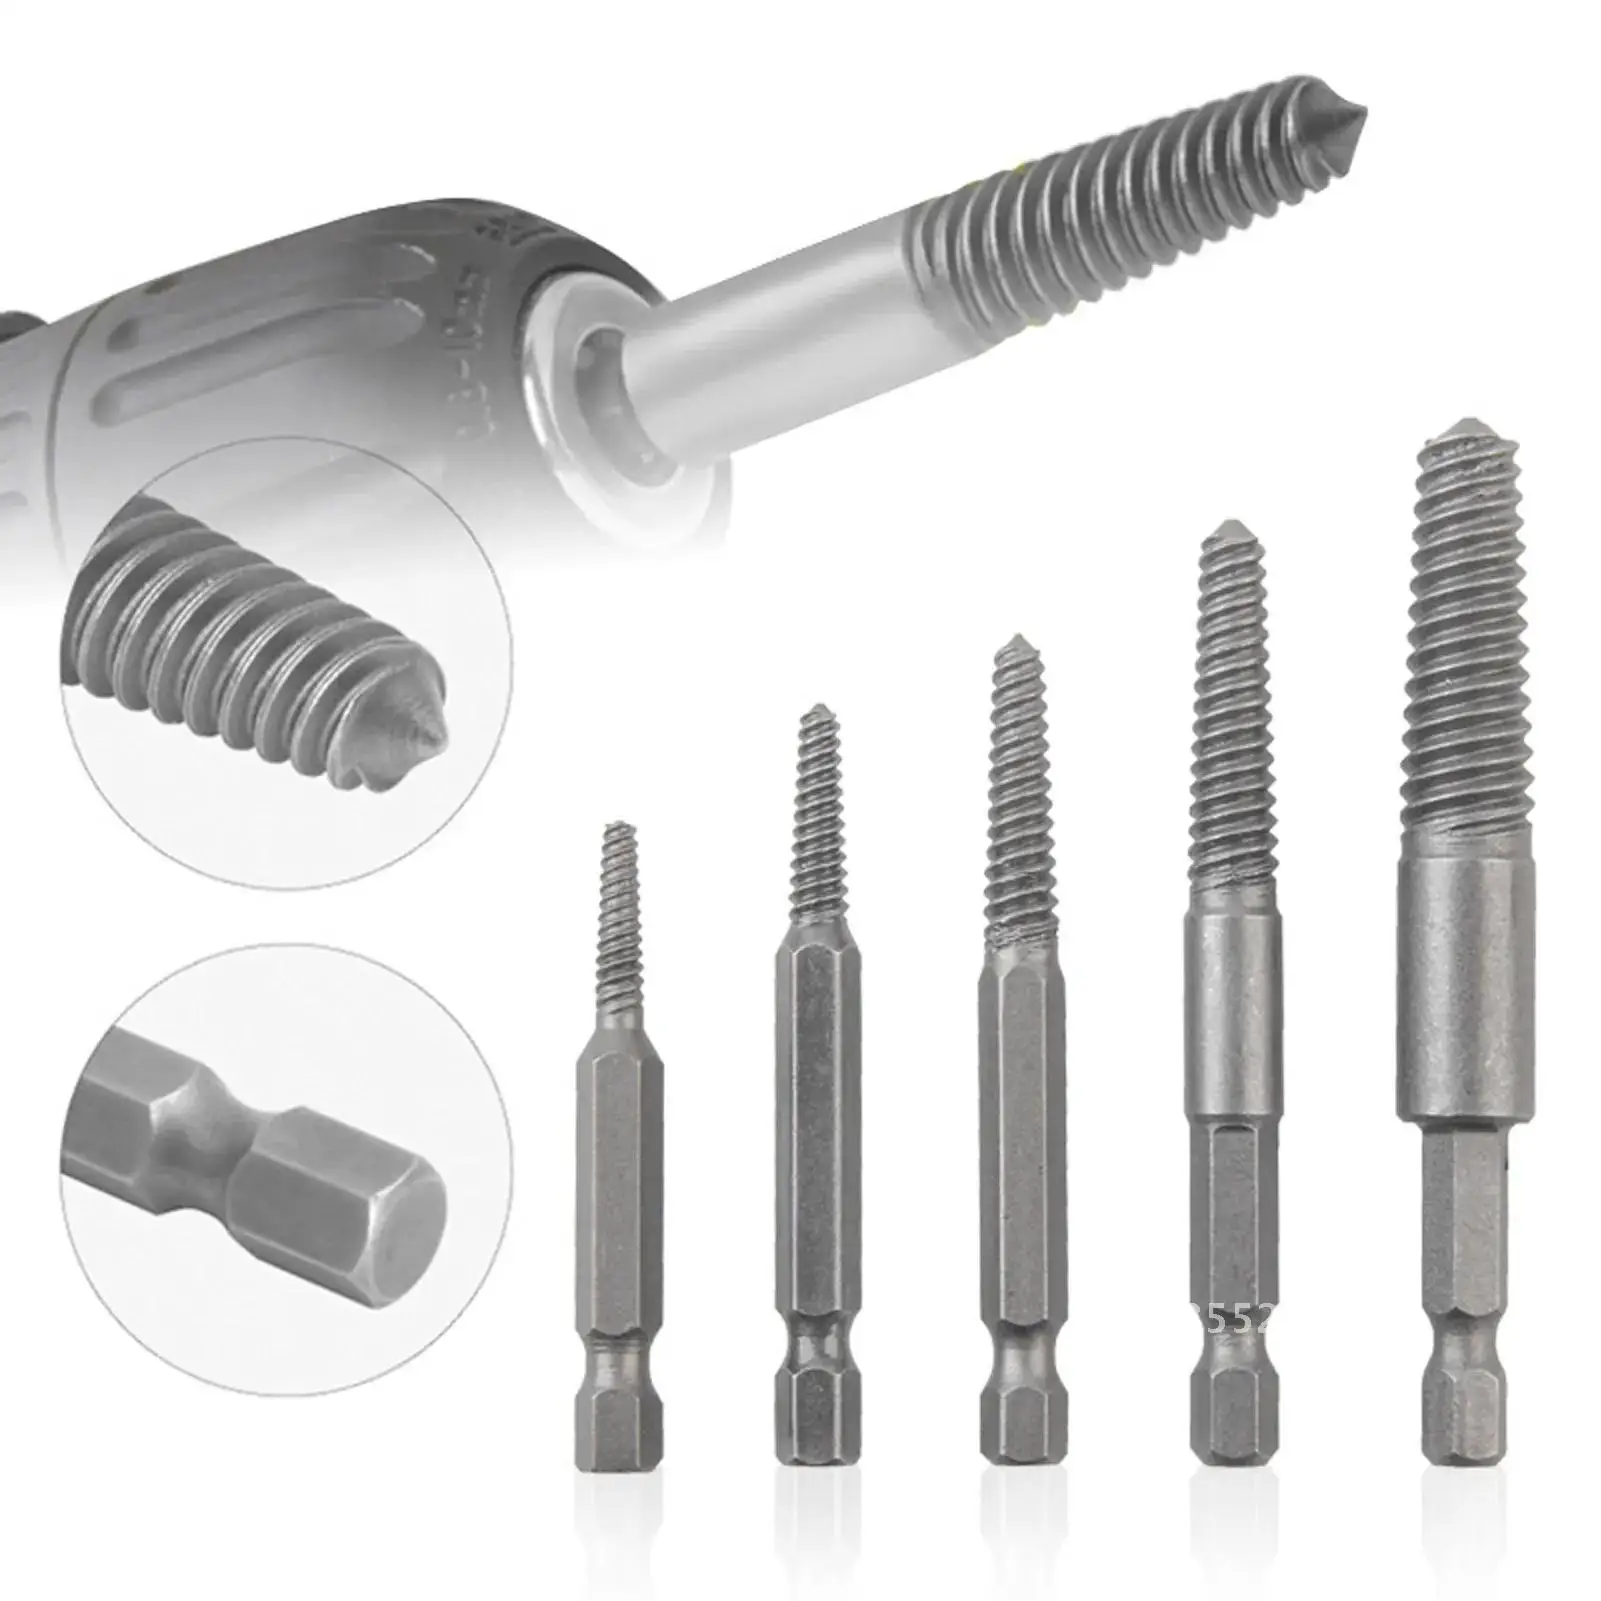 

Extractor Set Screw 6Pcs Kit Extractor Screw Damaged Tool Remover Screw Stripped Sets Remover Bolt Broken Set Bit Drill For Men